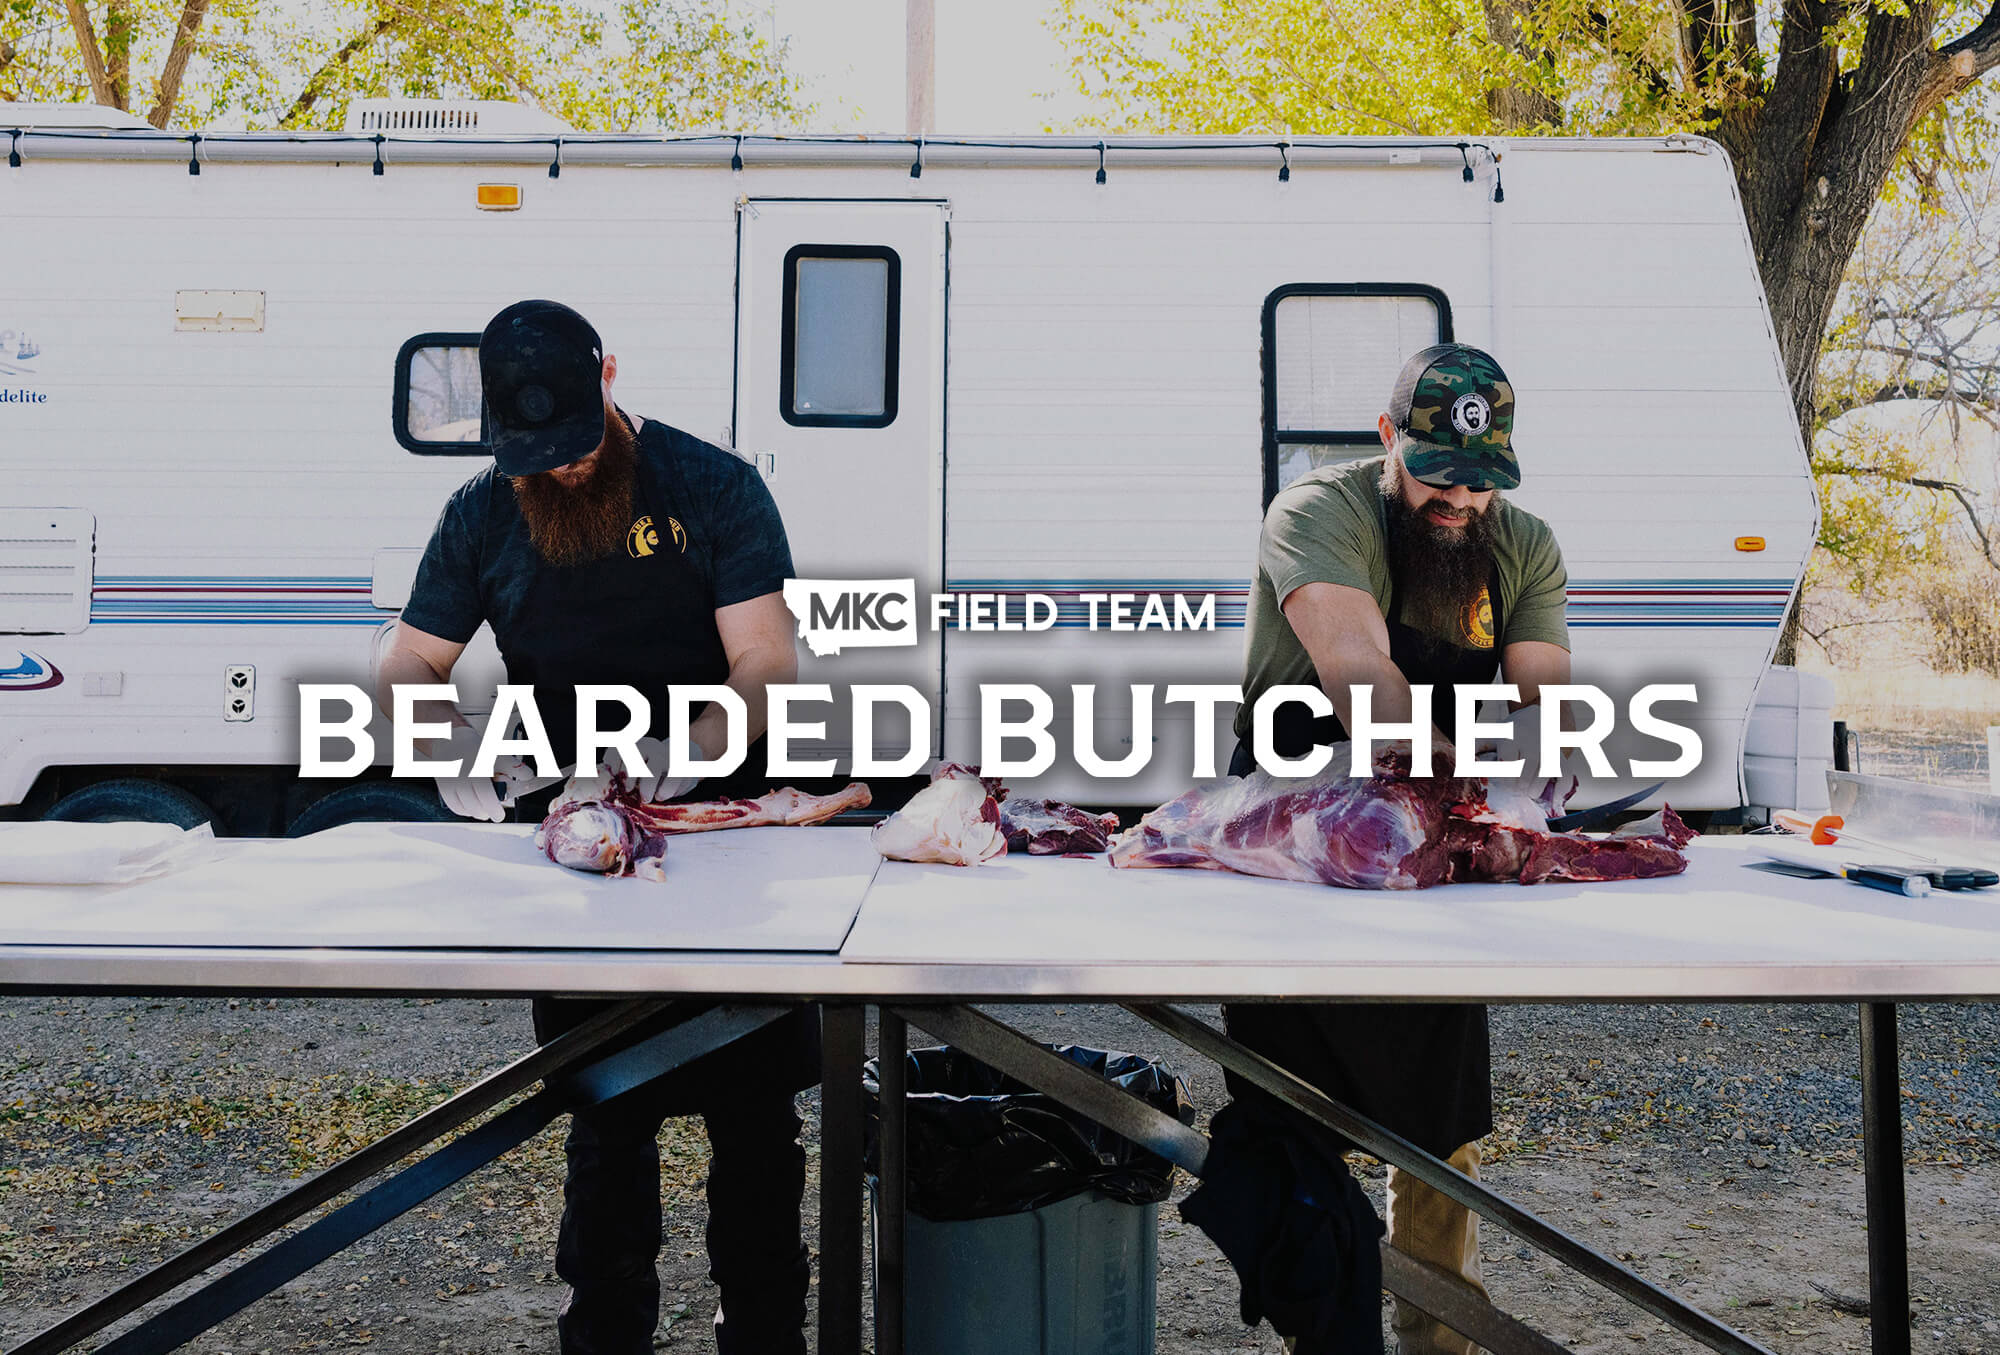 Brothers Seth and Scott Perkins, AKA the Bearded Butchers, smile while standing in front of hanging meats.